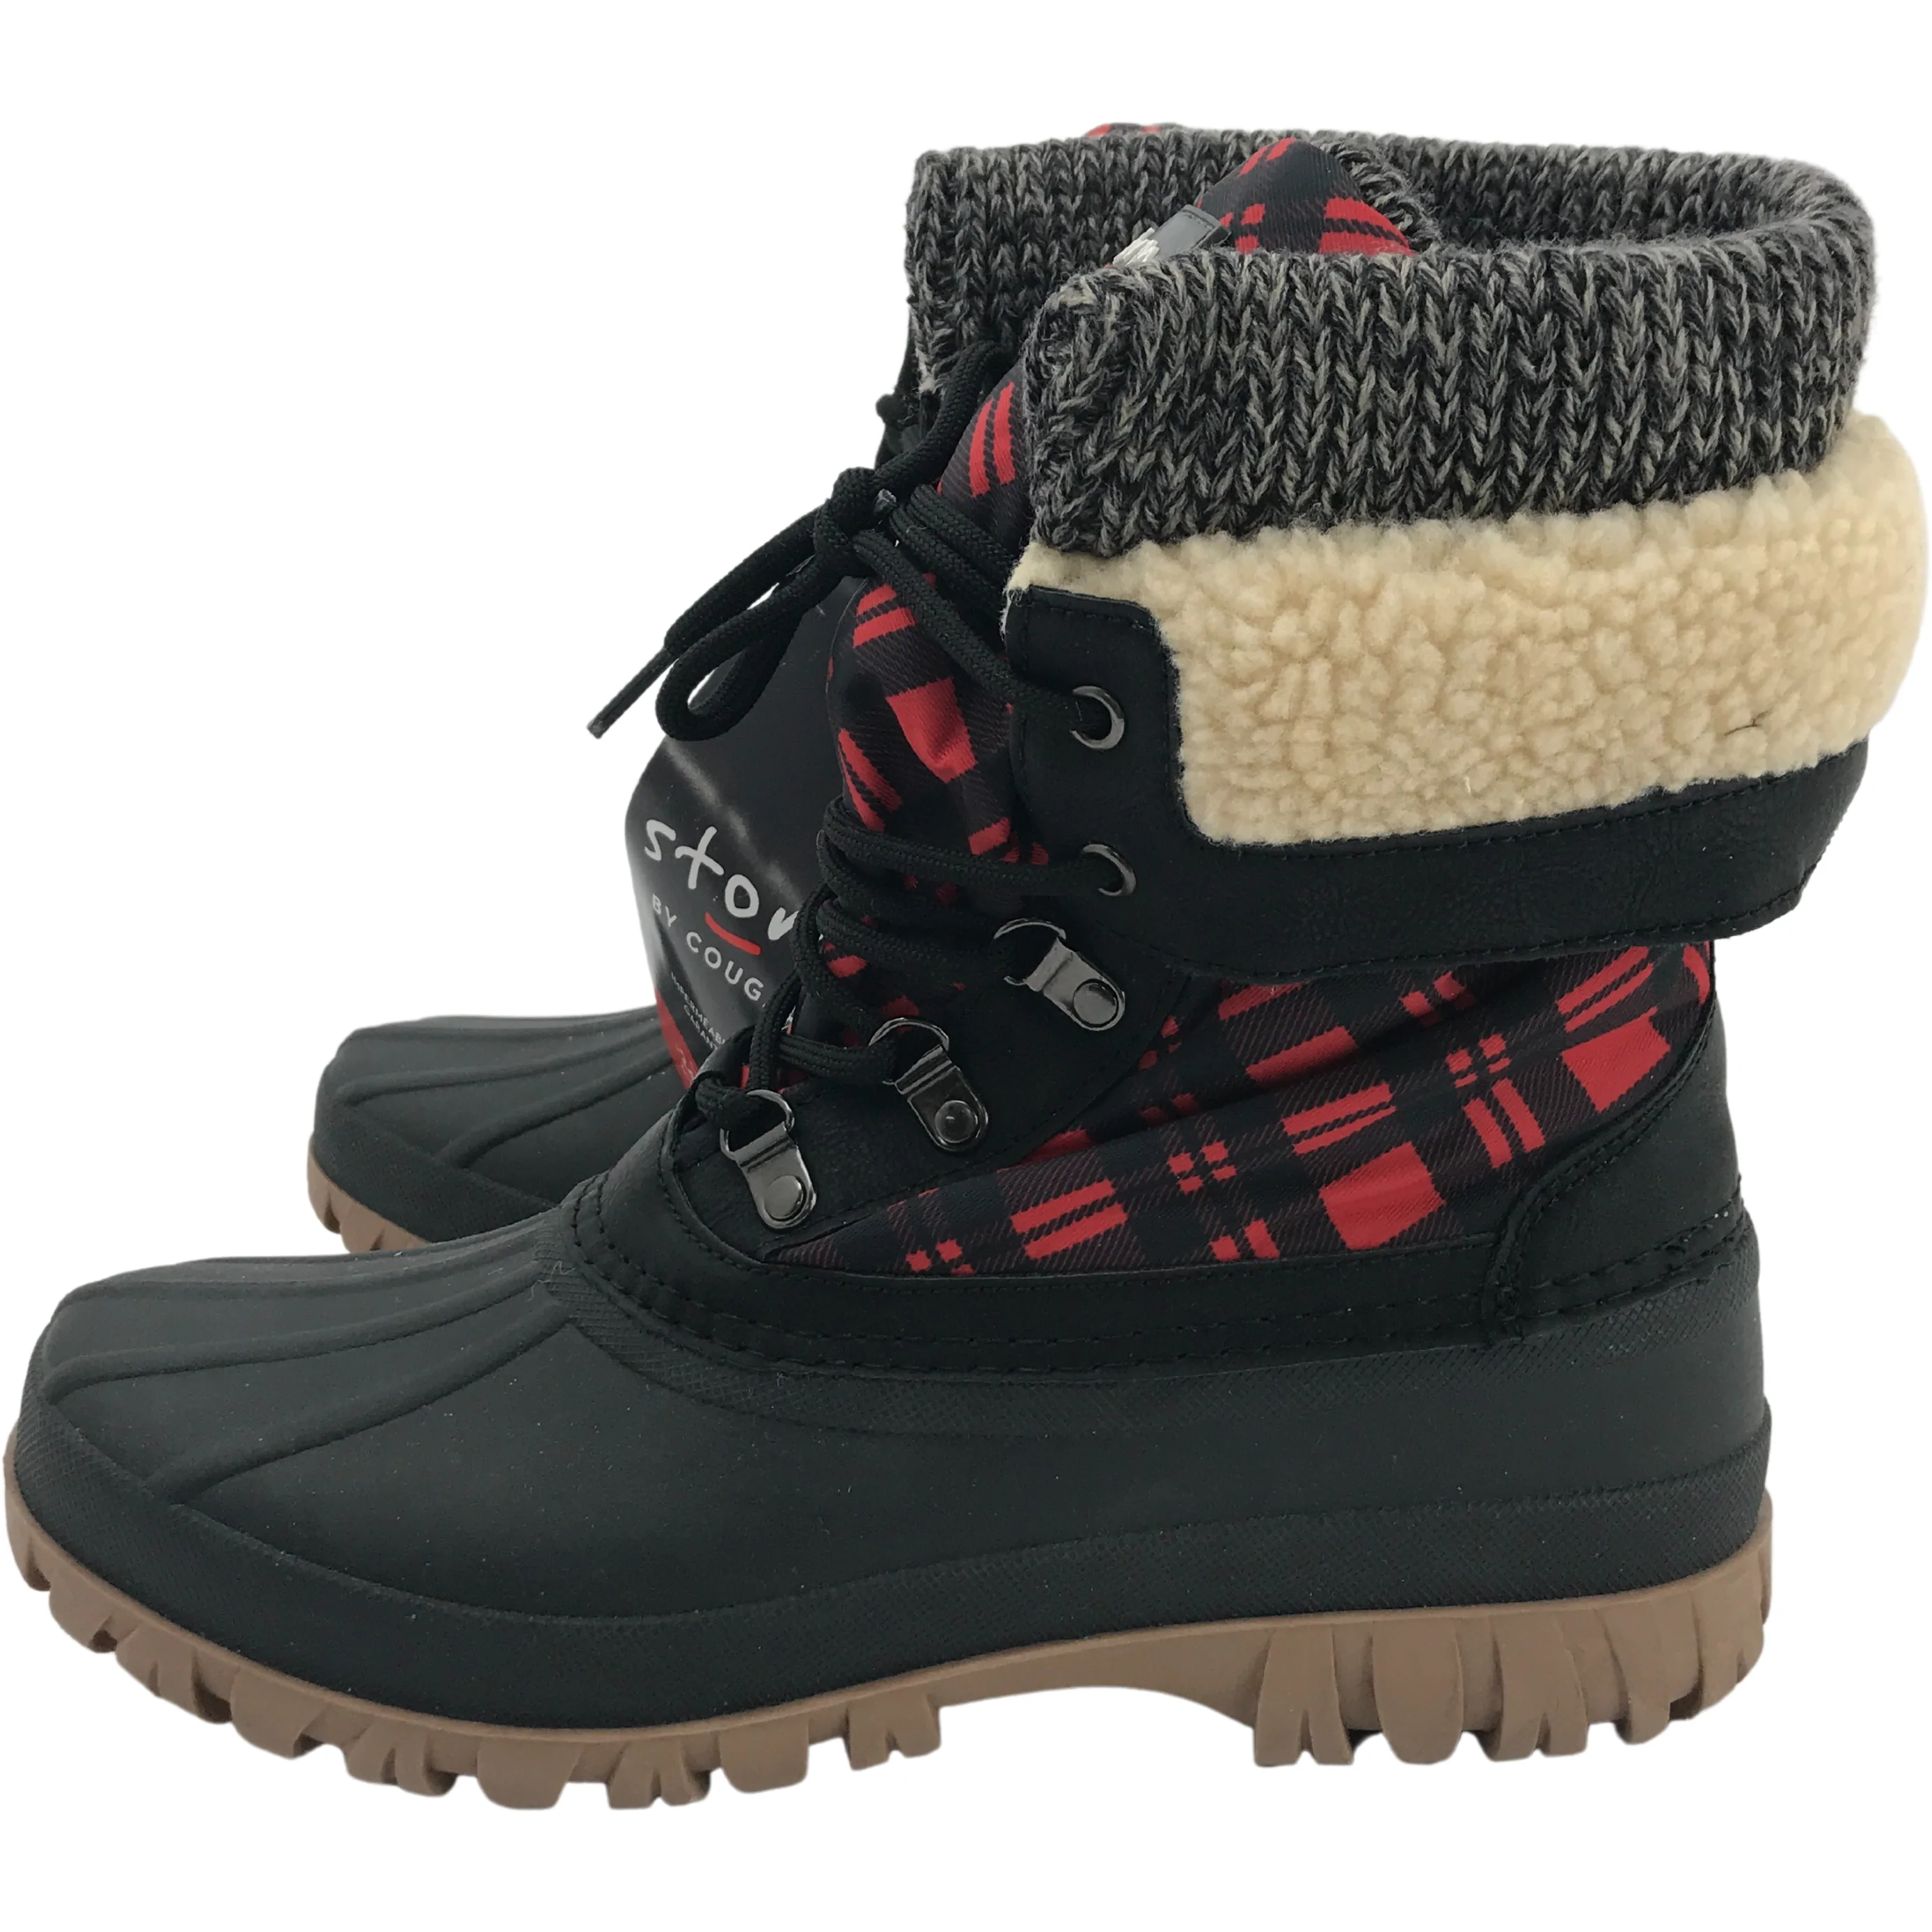 Storm by Cougar Women's Winter Boots / Red Plaid / Lace Up / Size 10